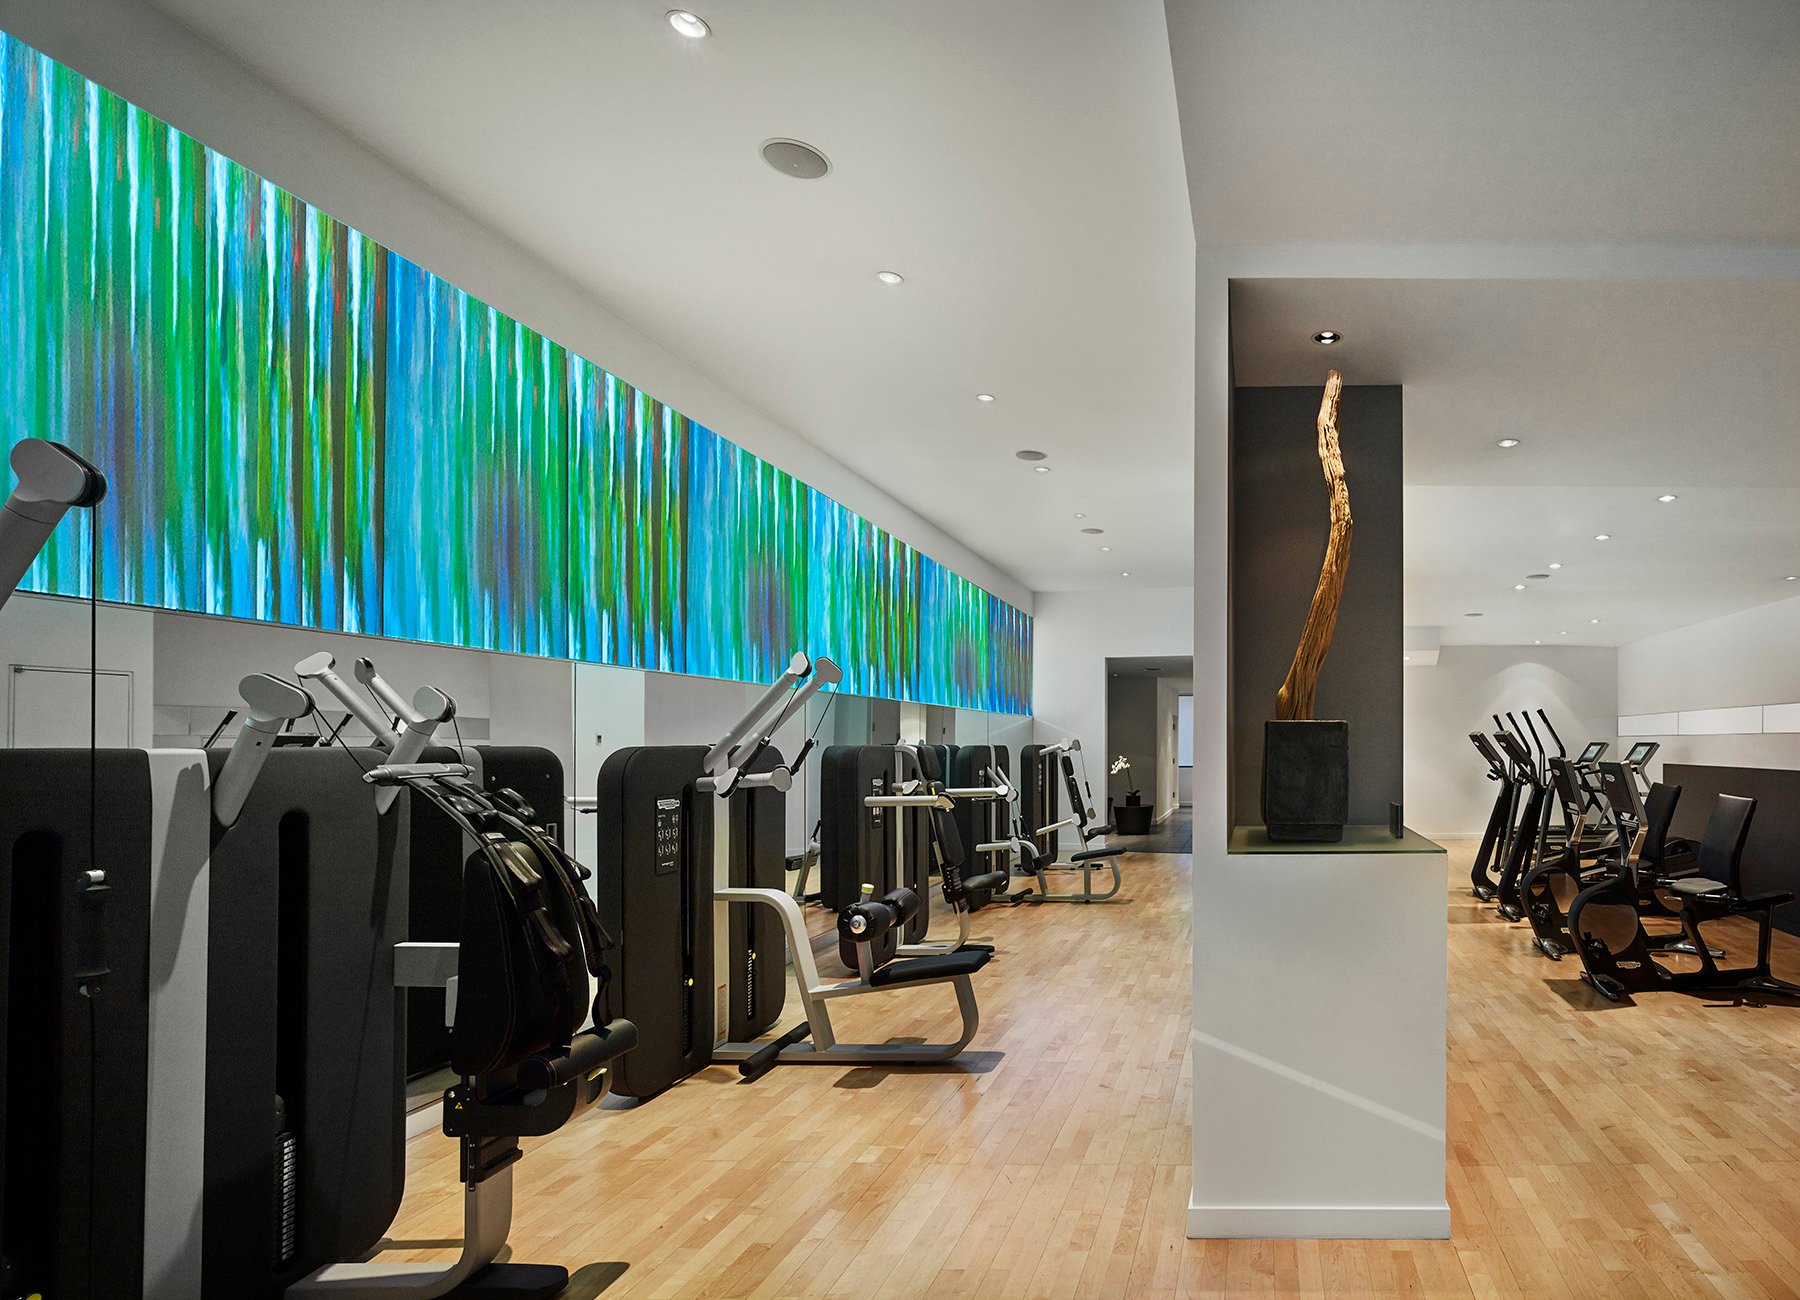 AKA Central Park fitness center/gym with artwork and state-of-the-art cardio equipment